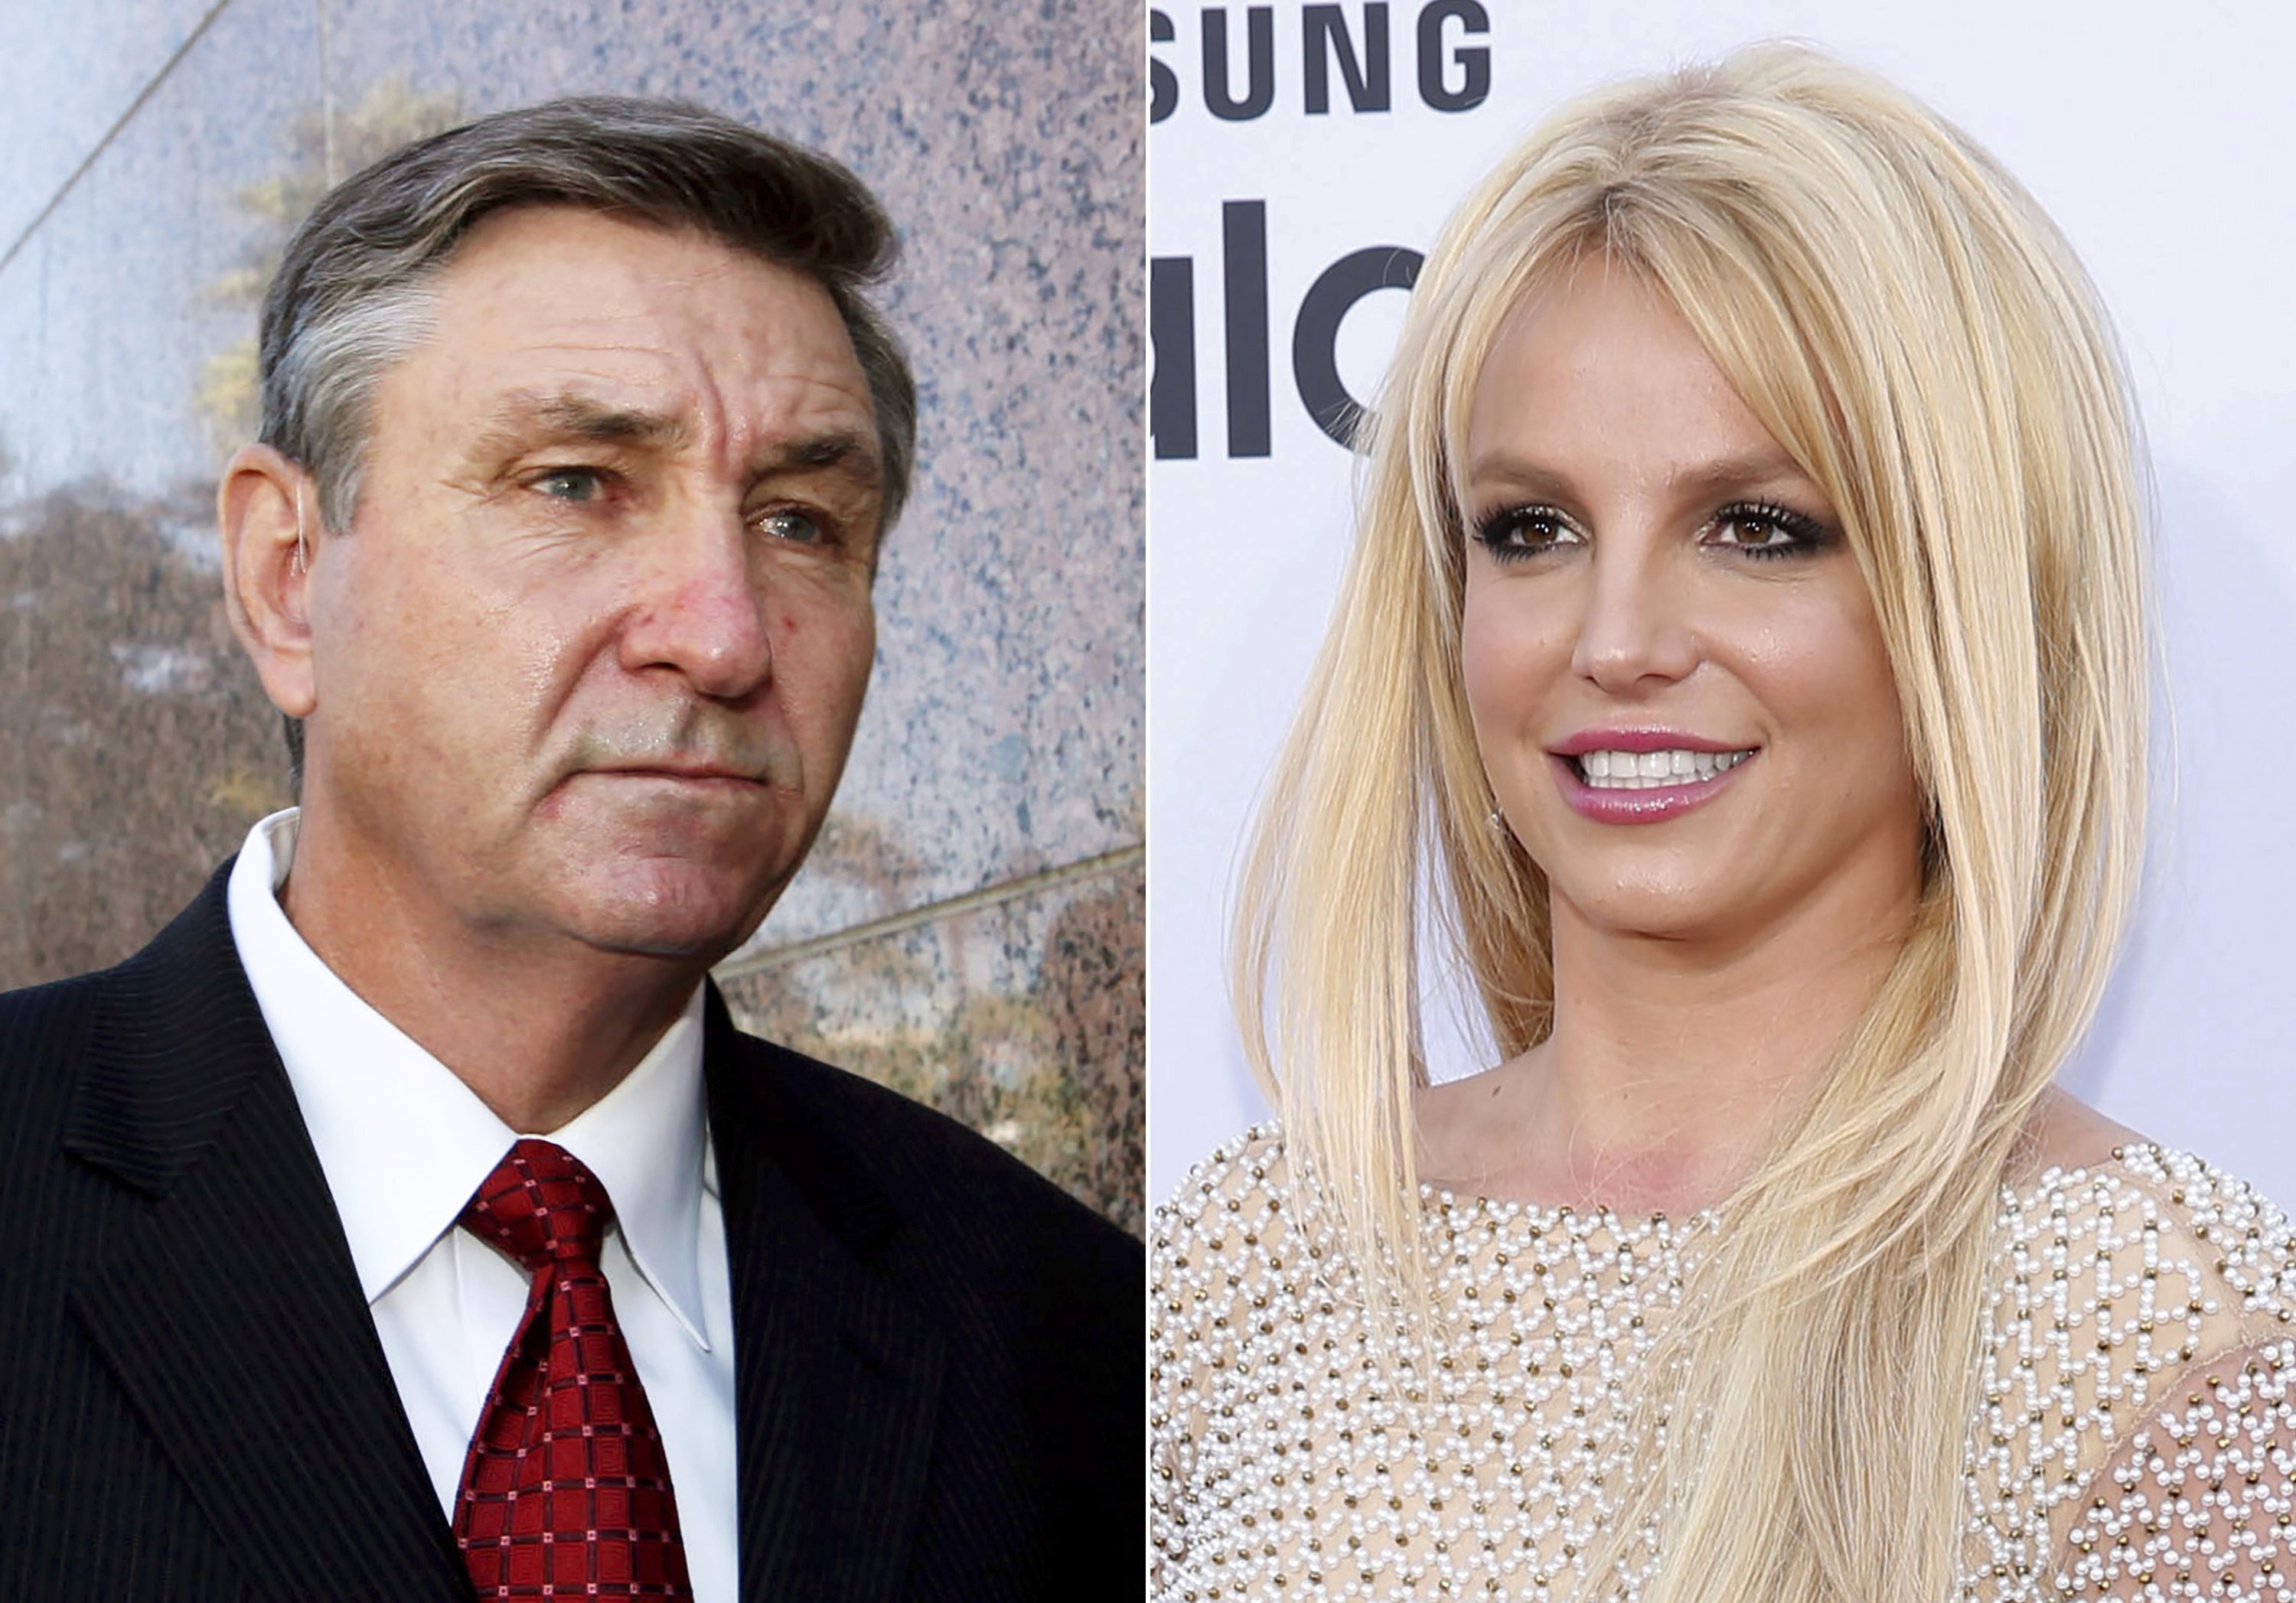 Jamie Spears, father of singer Britney Spears, leaves the Stanley Mosk Courthouse in Los Angeles, U.S., Oct. 24, 2012, (L) and Britney Spears arrives at the Billboard Music Awards in Las Vegas, U.S., May 17, 2015. (AP Photo)